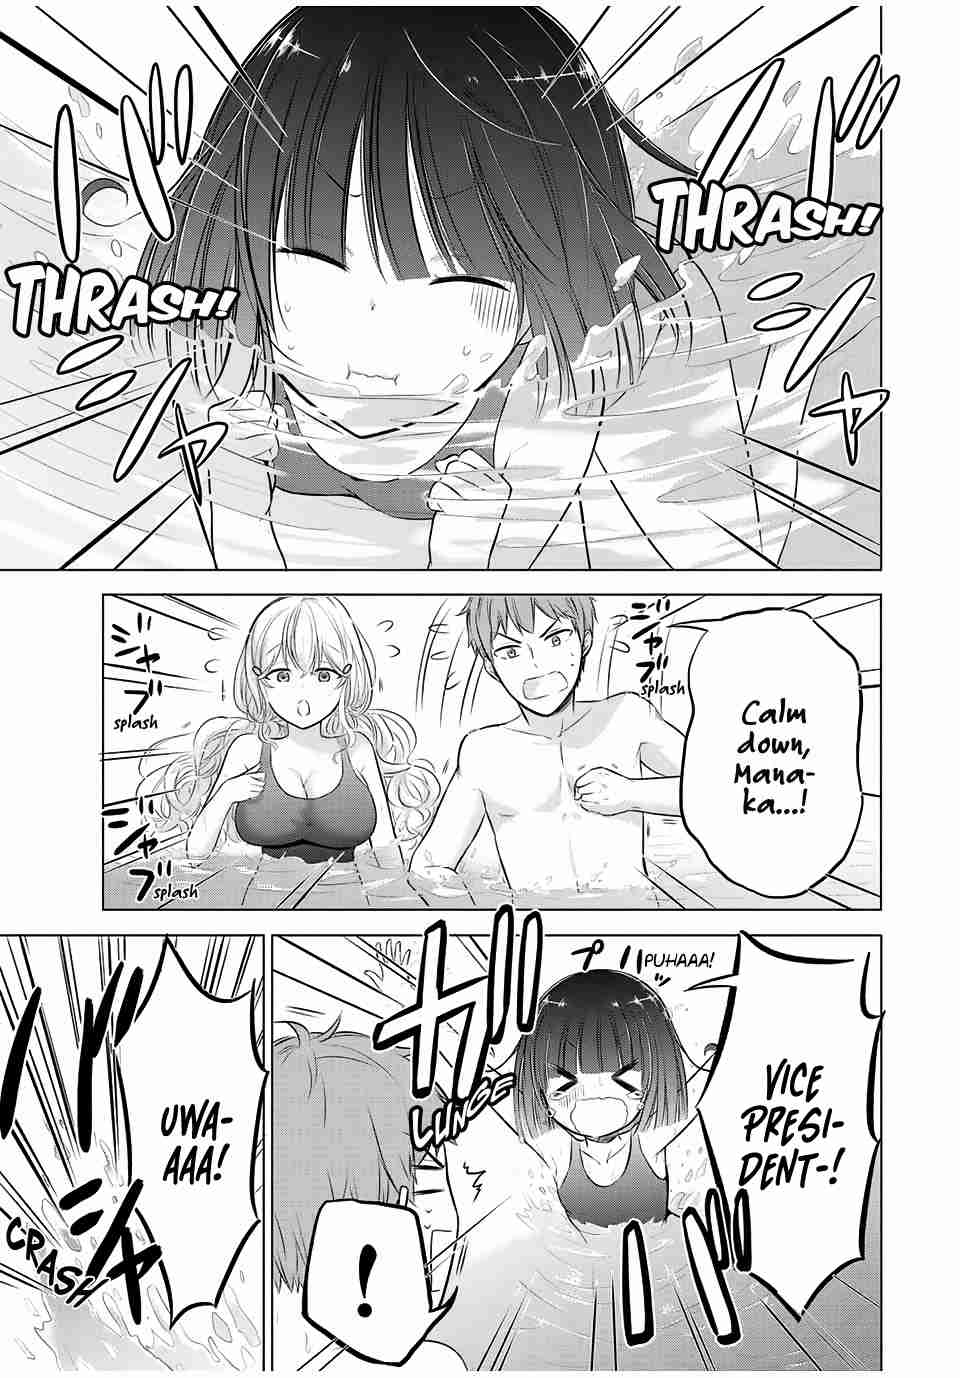 The Student Council President Solves Everything on the Bed Vol. 2 Ch. 6.1 The Wandering Desks part 1